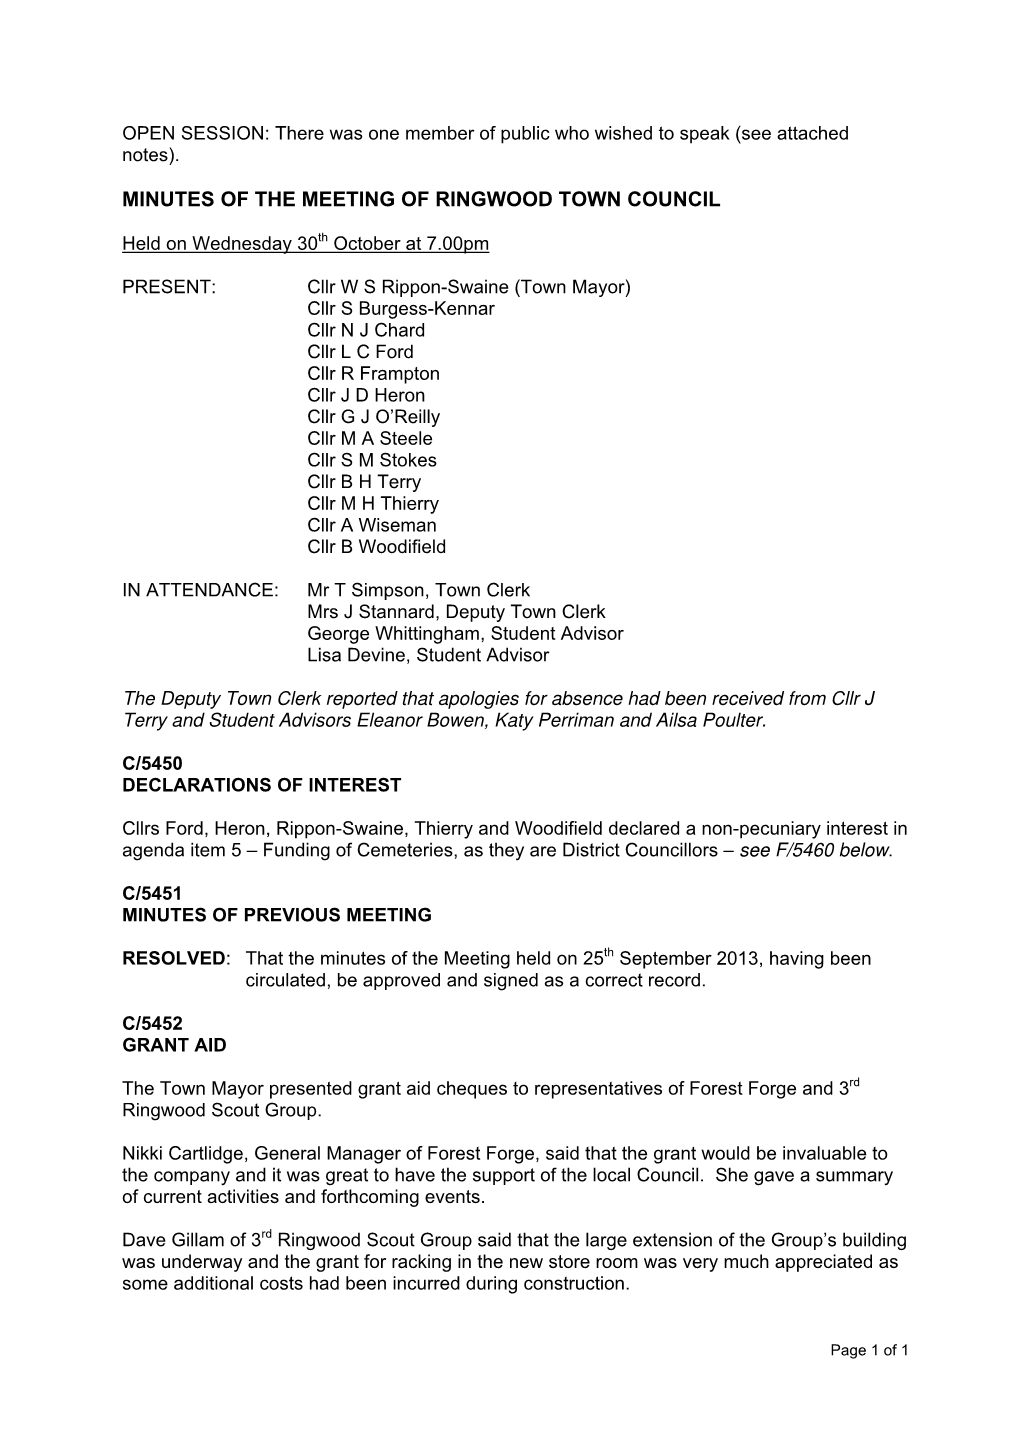 Minutes of the Meeting of Ringwood Town Council